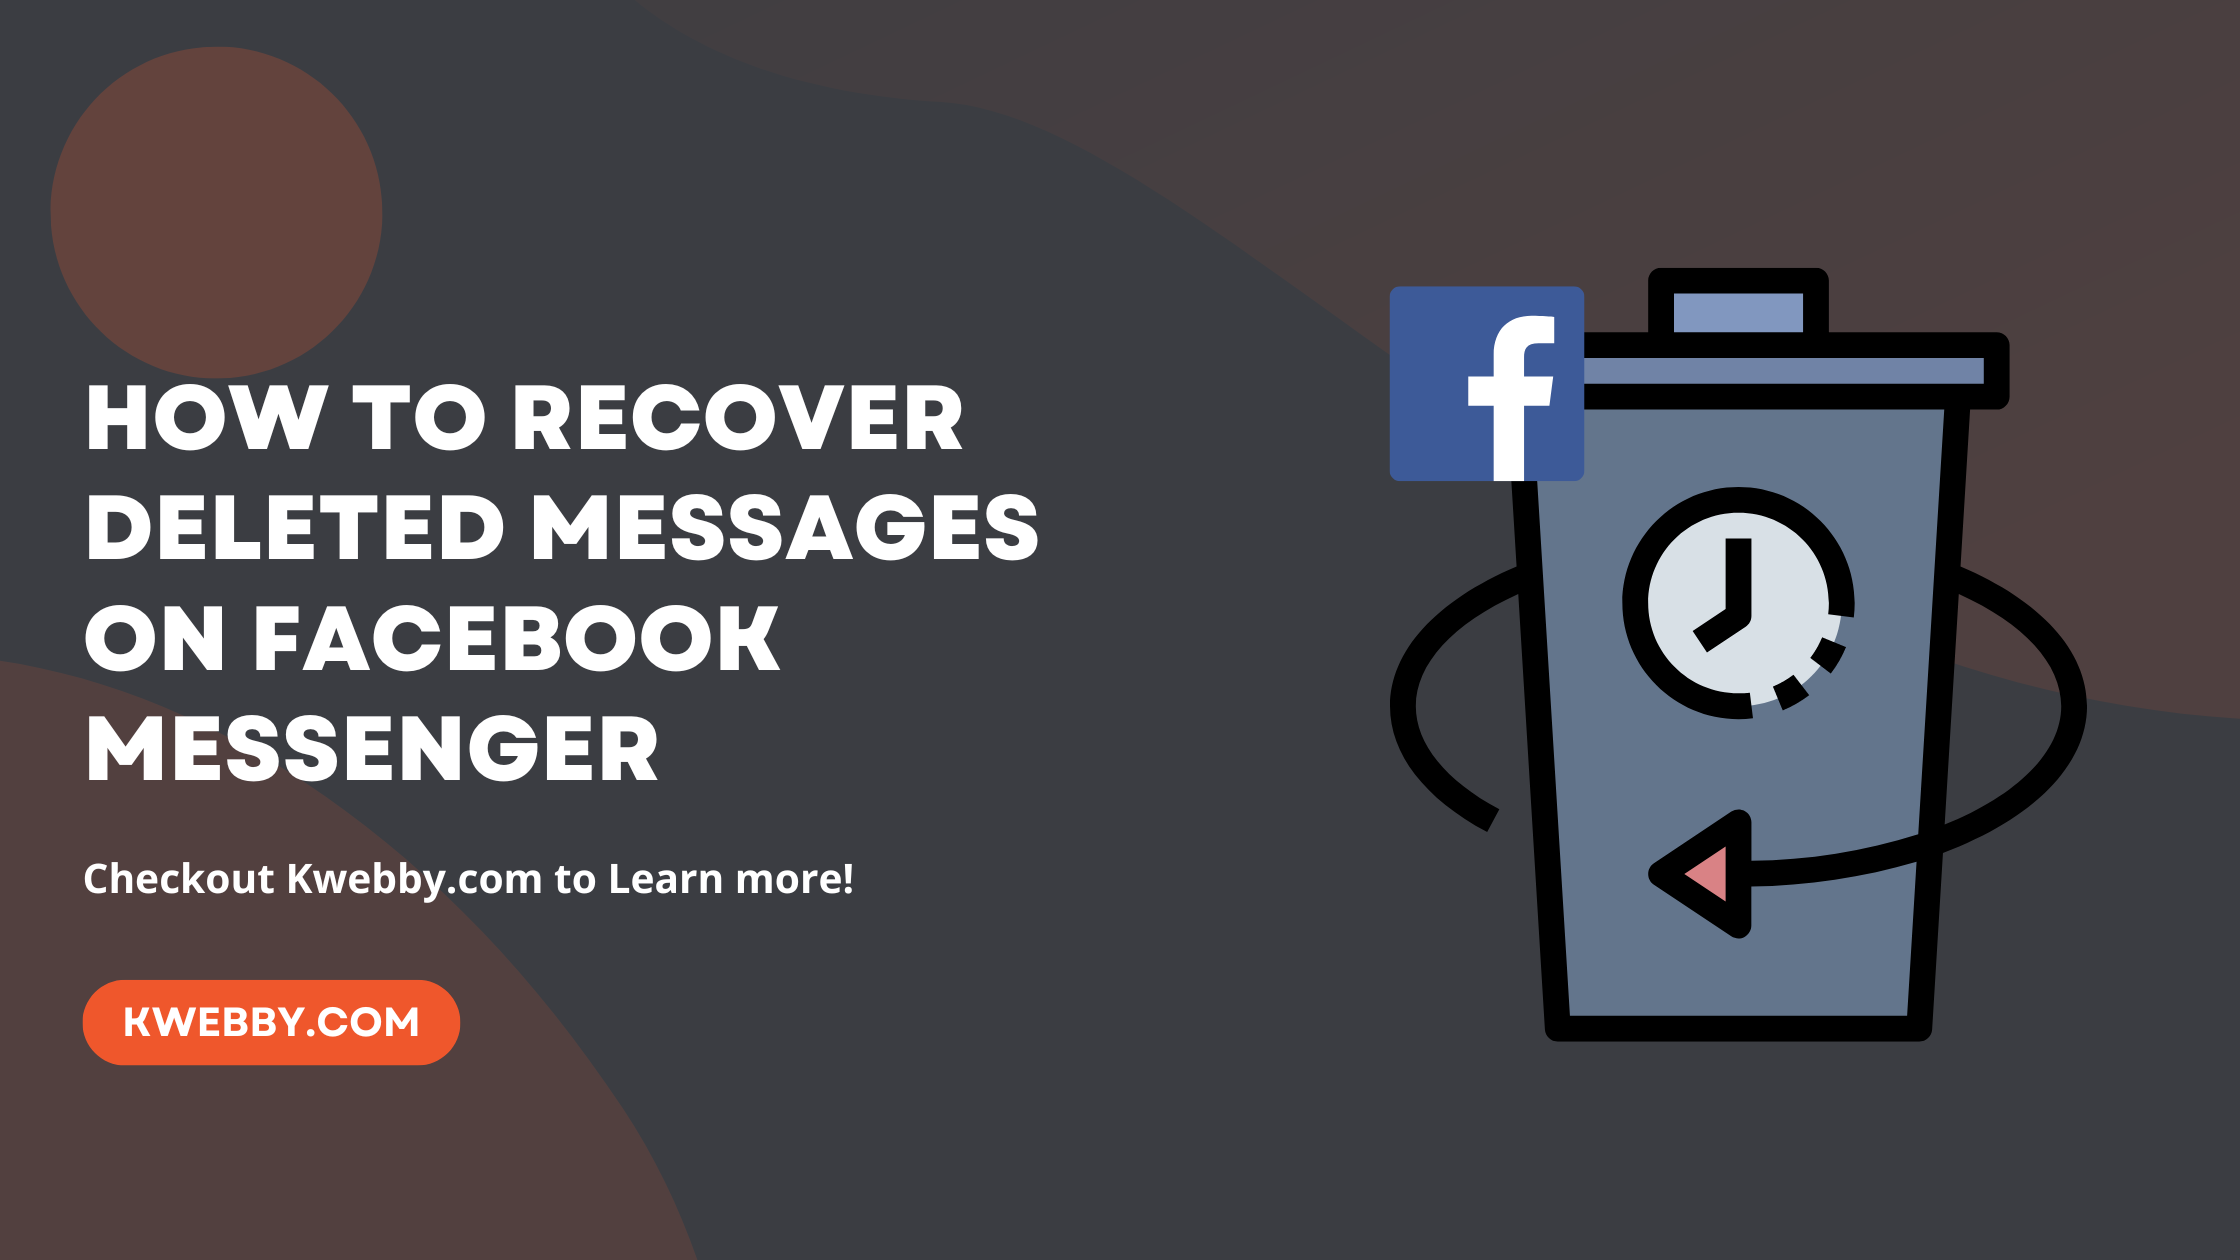 How to recover deleted messages on Facebook Messenger